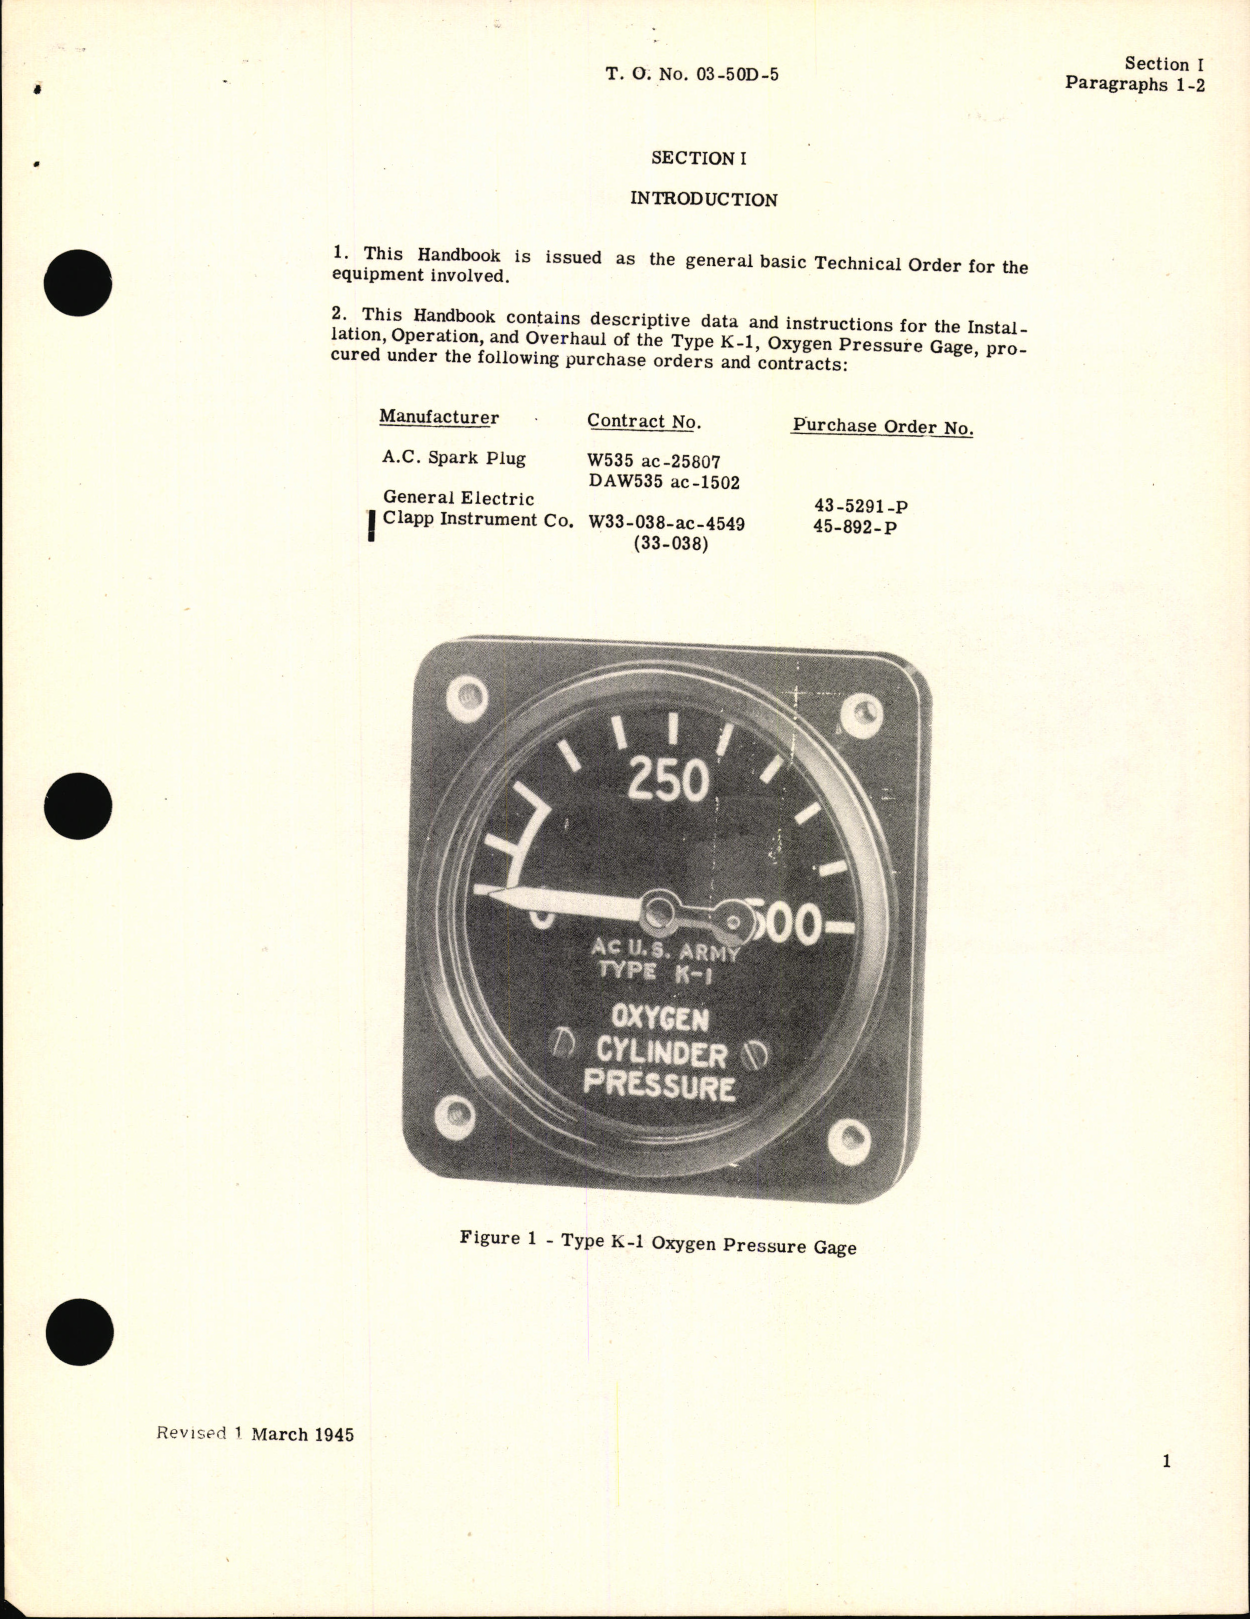 Sample page 5 from AirCorps Library document: Operation, Service and Overhaul Instructions with Parts Catalog for Oxygen Pressure Gage Type K-1